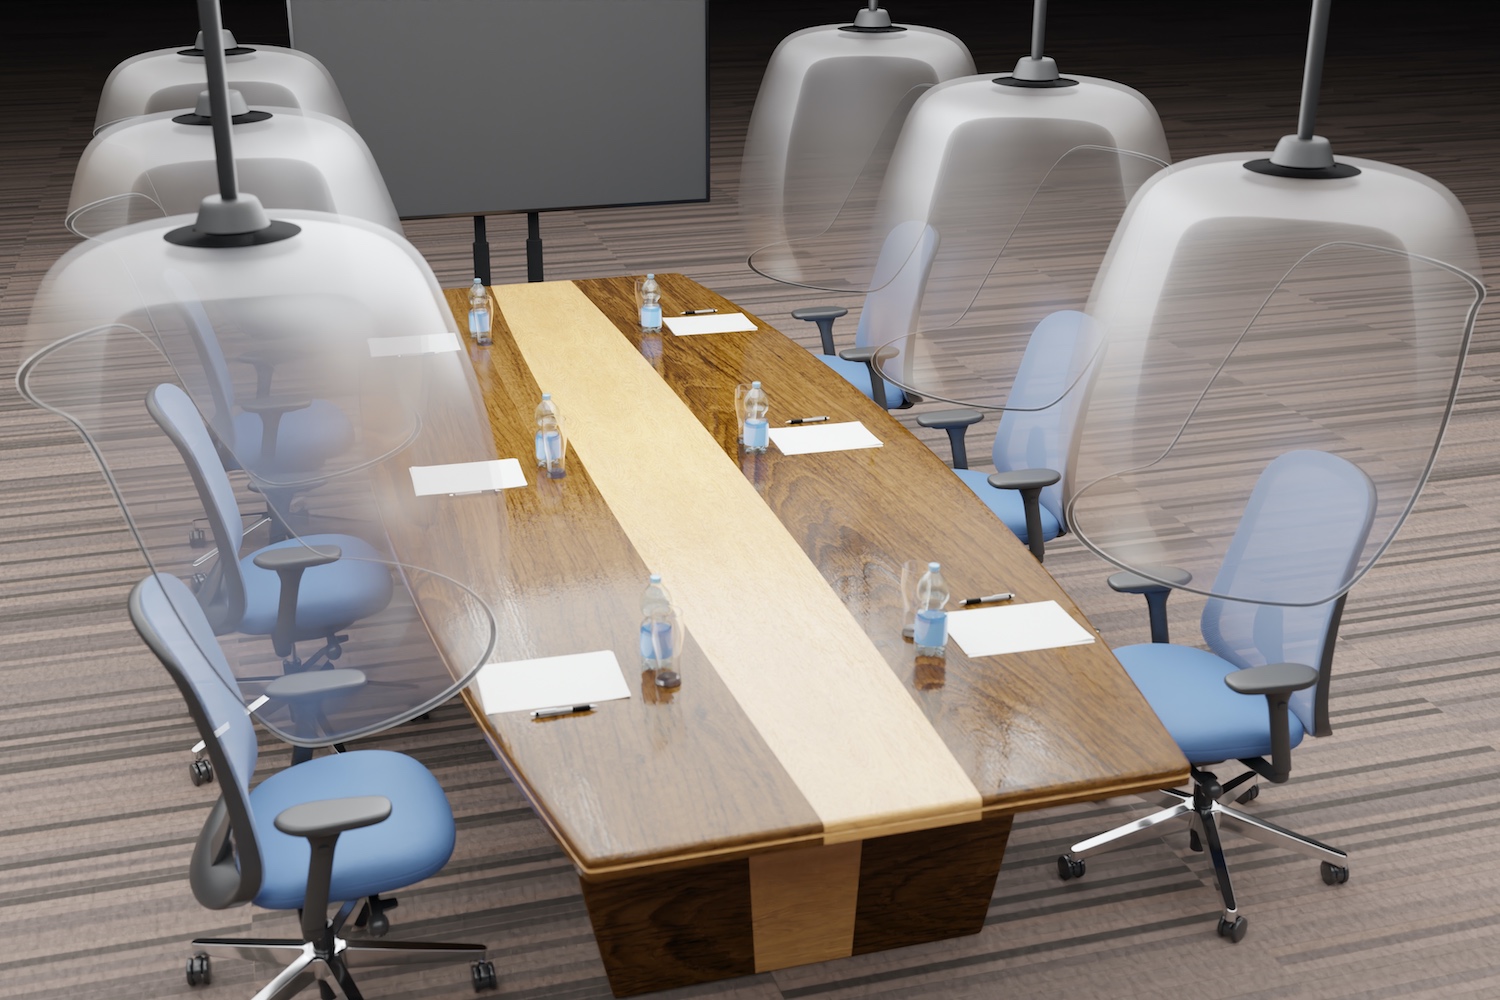 Design Ideas for the 2020 office - board table with protection pods